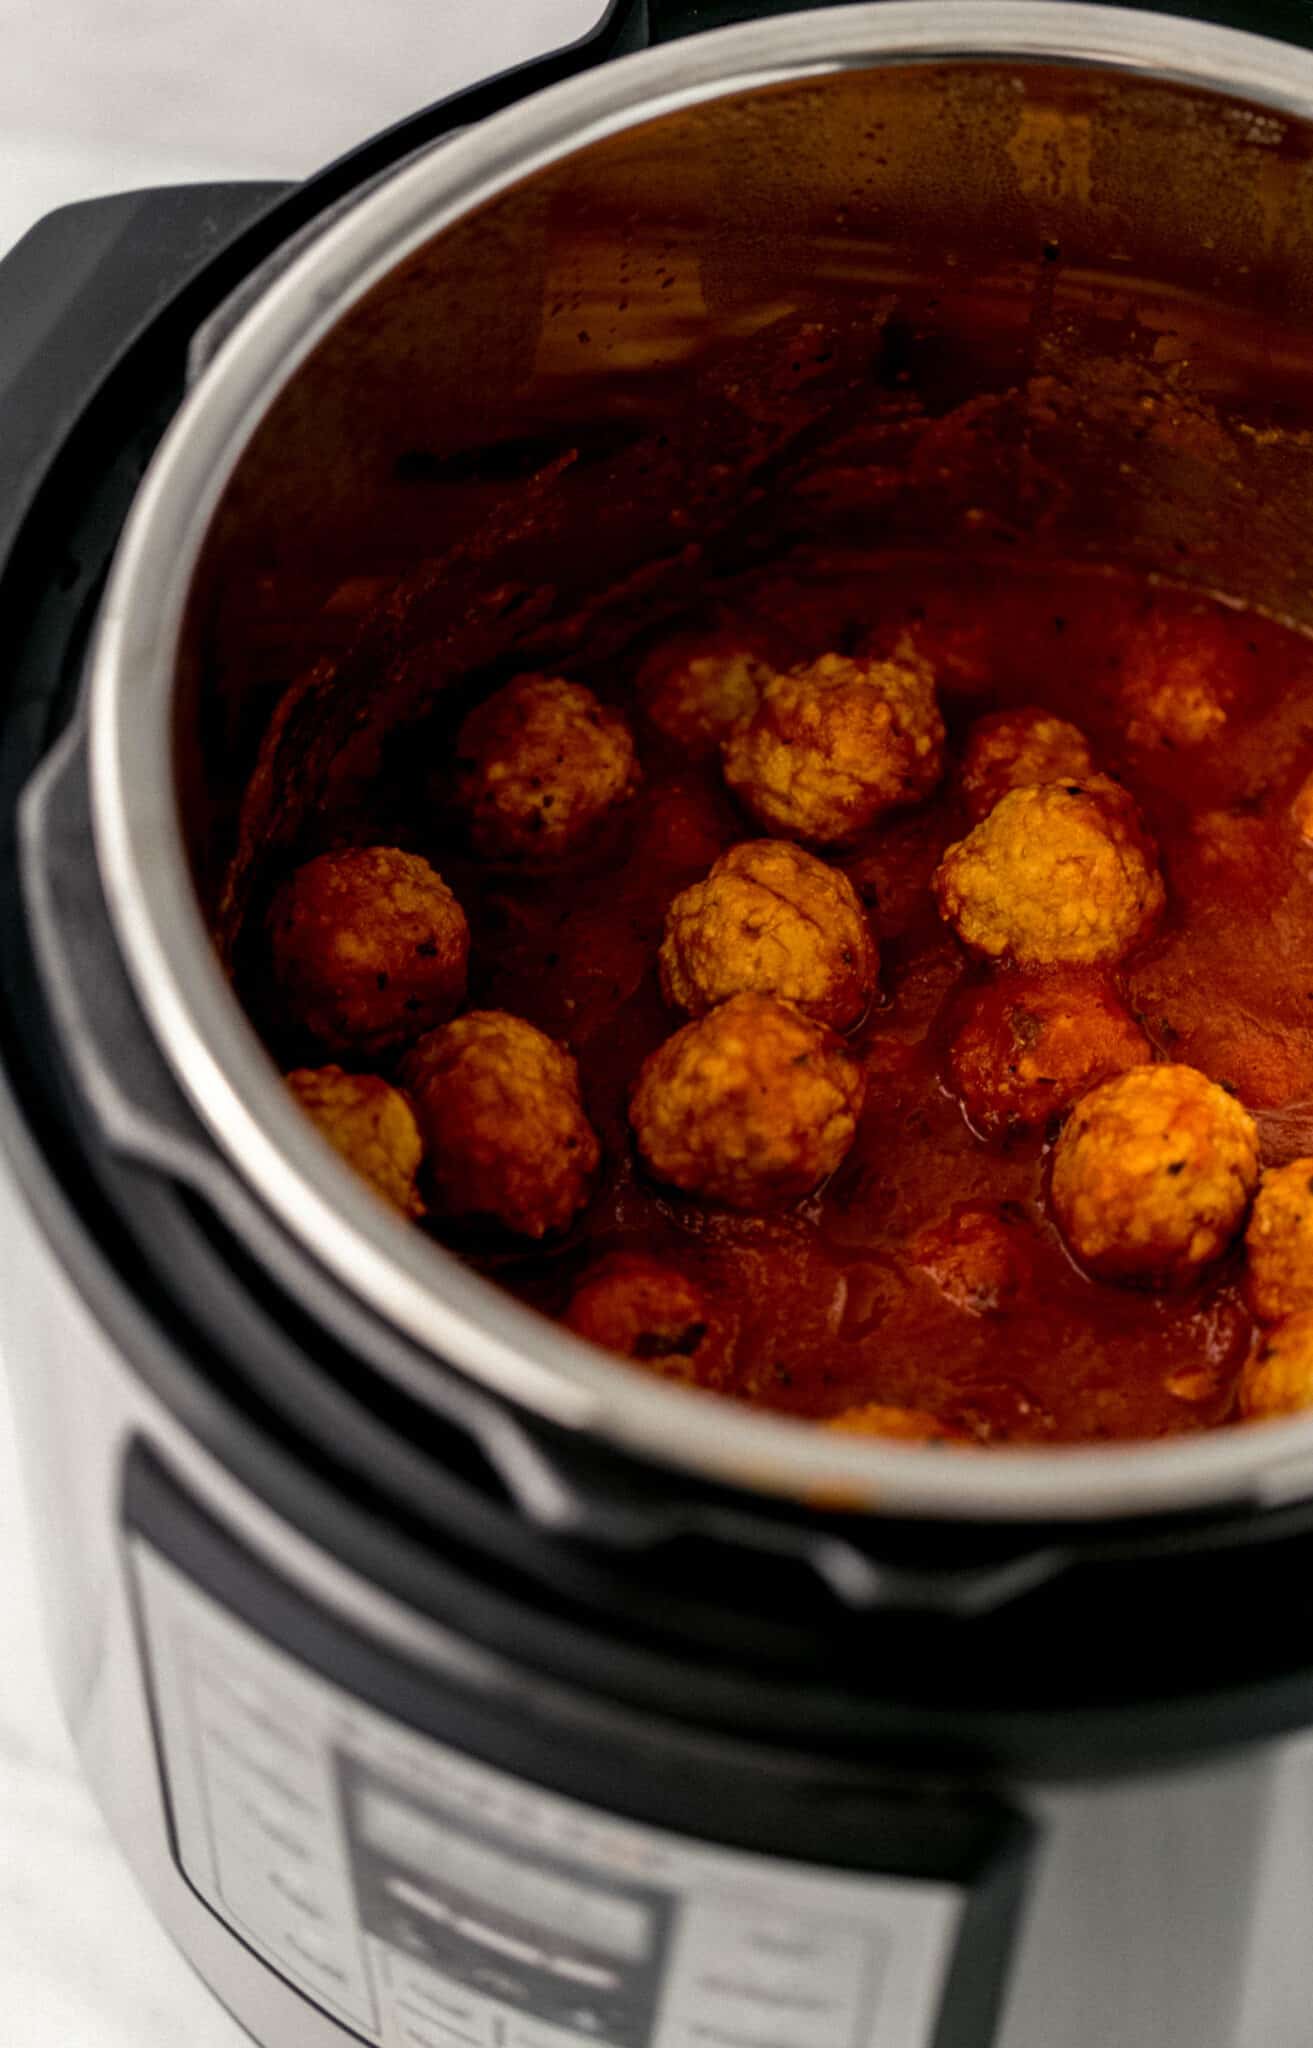 S/O to my Lil' Dipper pot. Love the simplicity of it, just plug & play.  Freezer precooked meatballs with a splash of marinara make for perfect  meatball subs. Will post an update